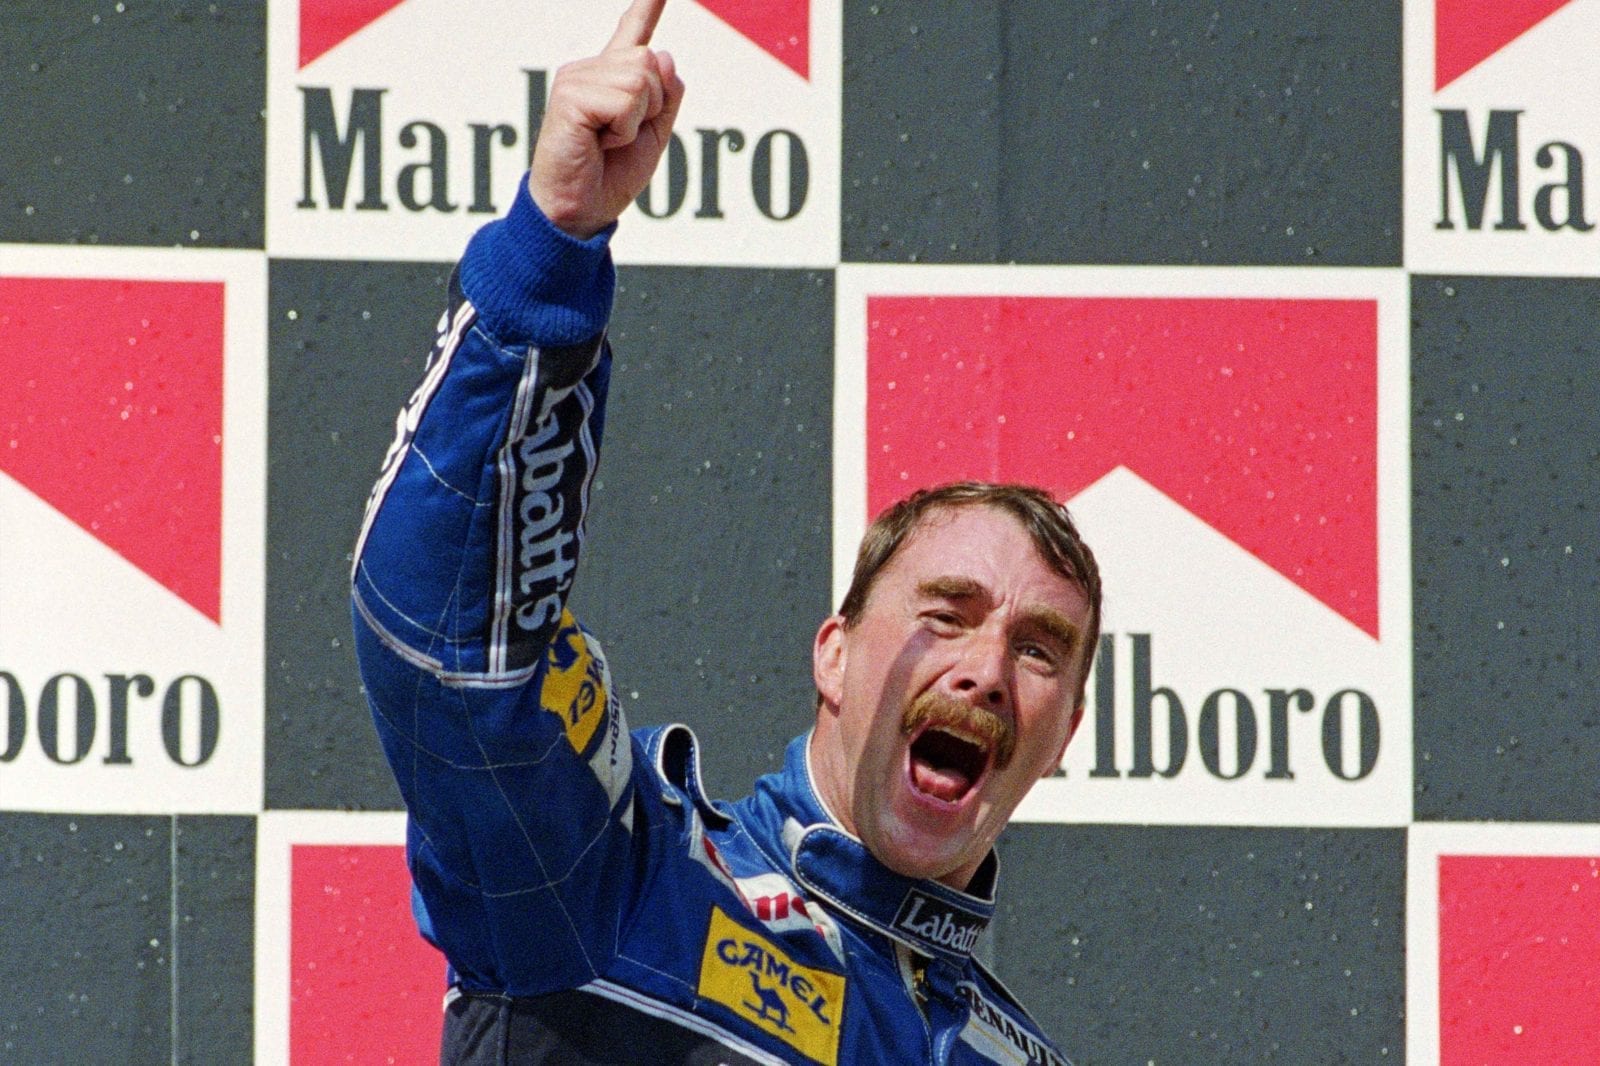 Nigel-Mansell-celebrates-clinching-the-1992-F1-drivers-championship-at-the-Hungarian-Grand-prix